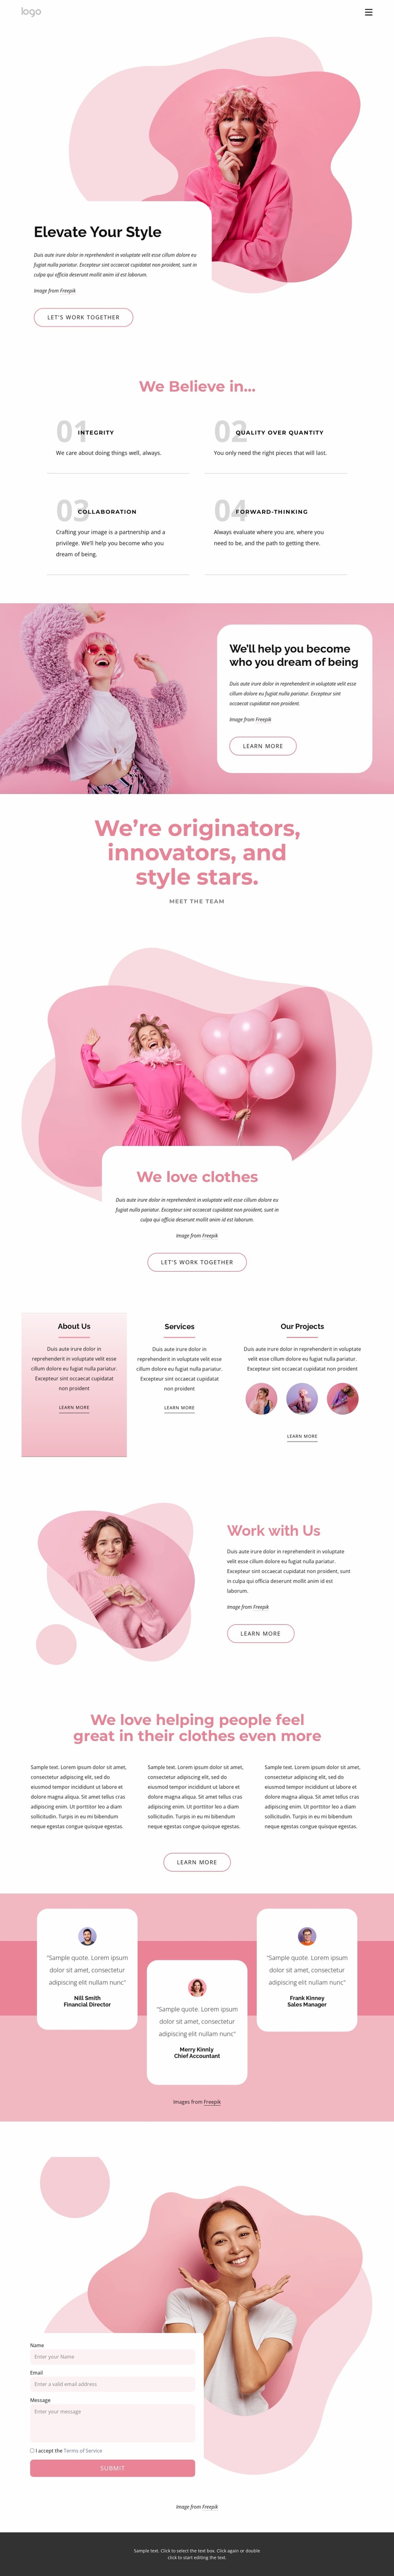 Elevate your style Ecommerce Website Design